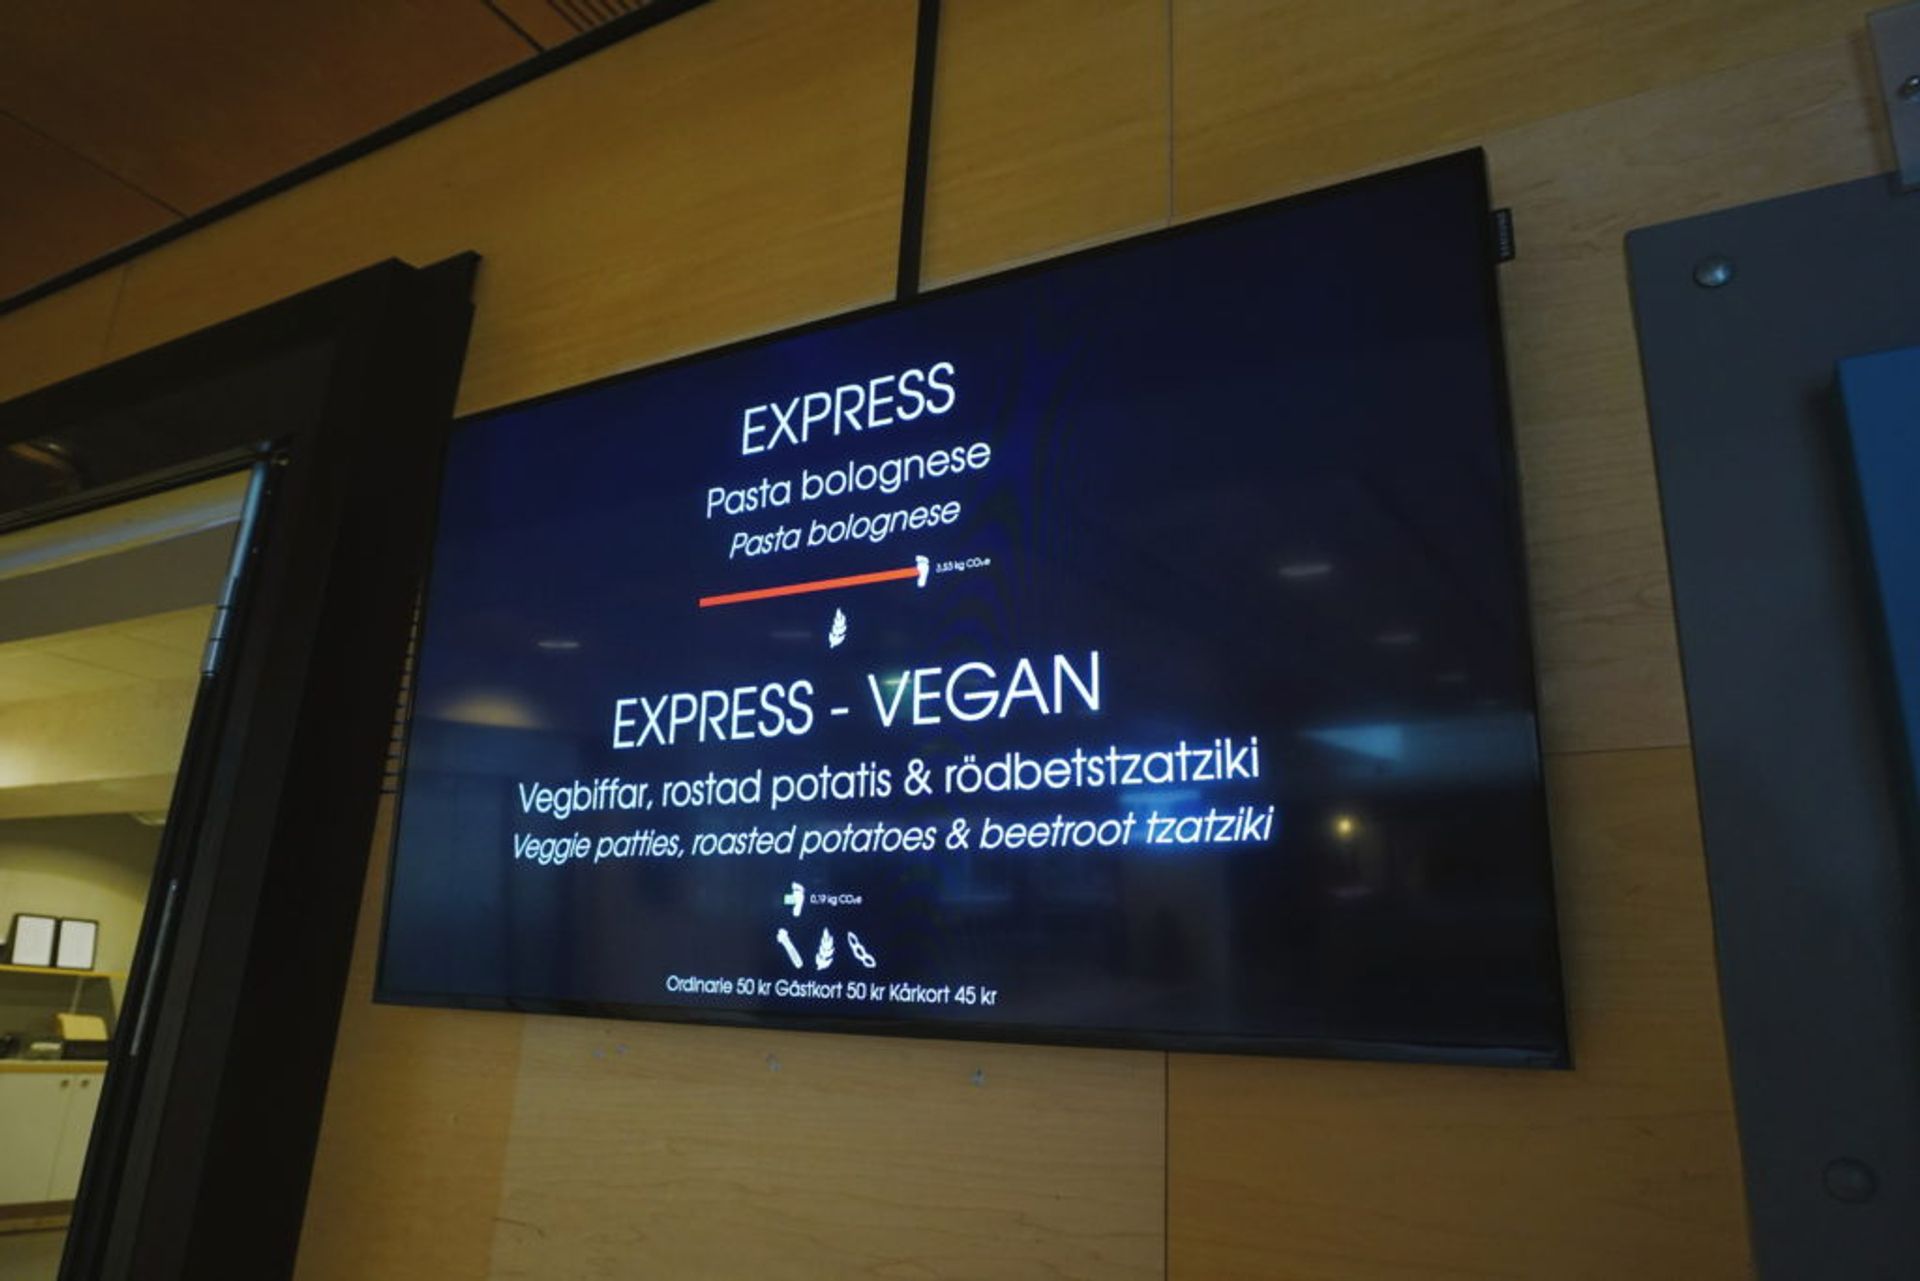 A TV showing what dishes that can be expressed delivered. It is a Pasta Bolognese or a vegan option of veggie biffs.